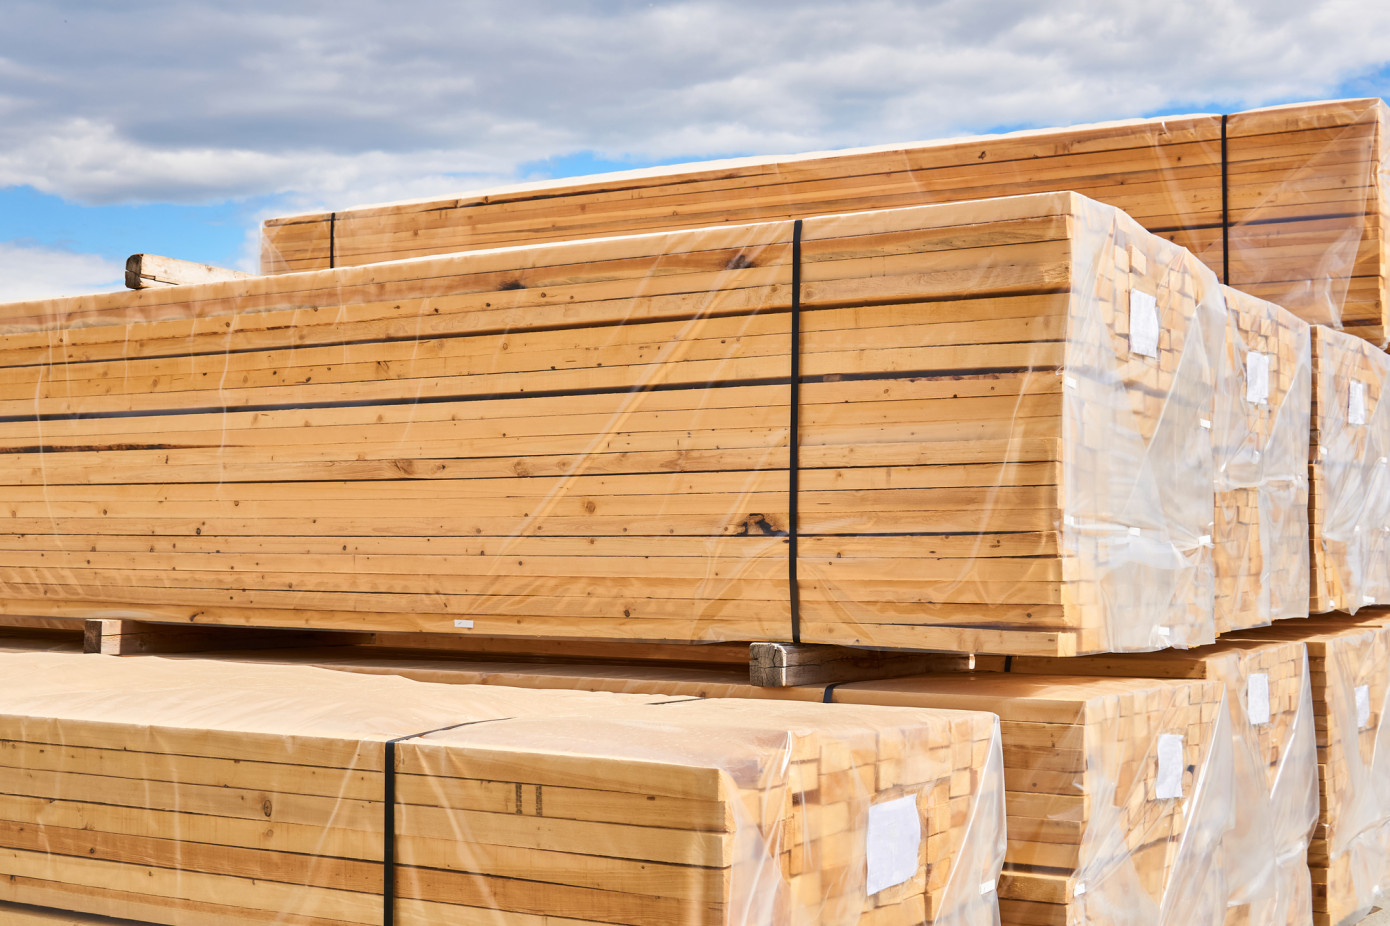 Exports of lumber from Sweden contract 43% in March